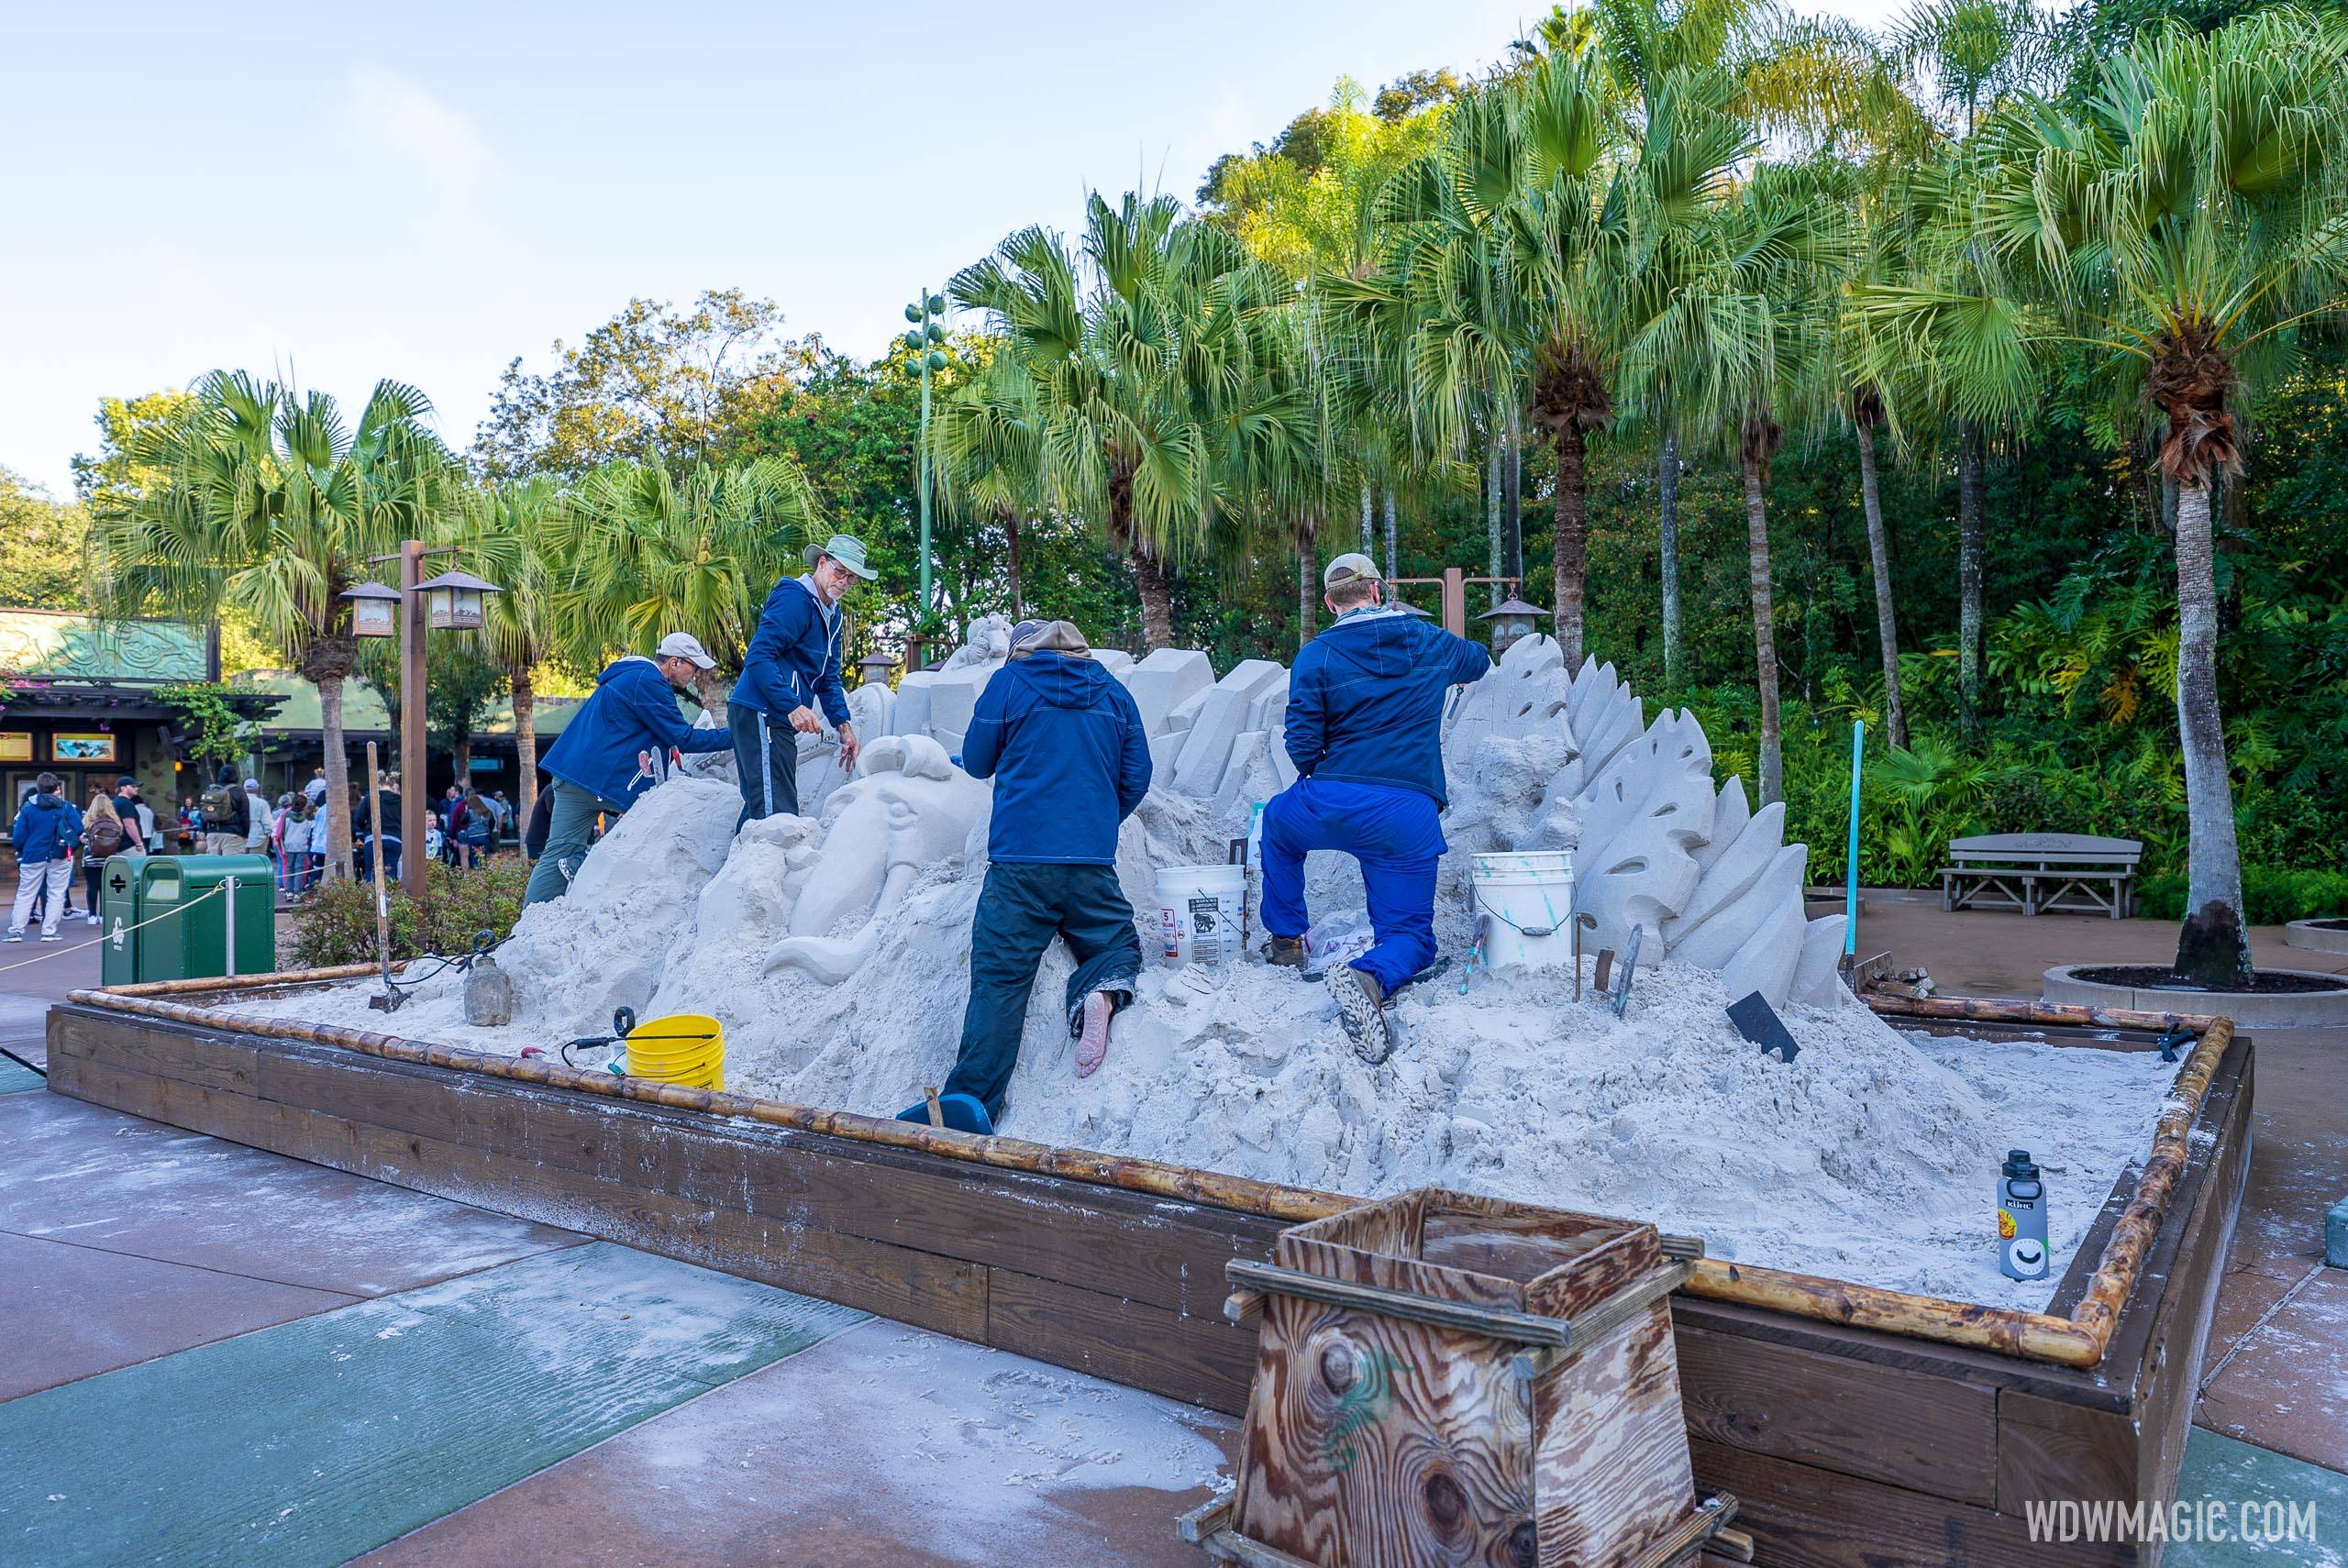 Review: Disney Sand Magic - Travel to the Magic